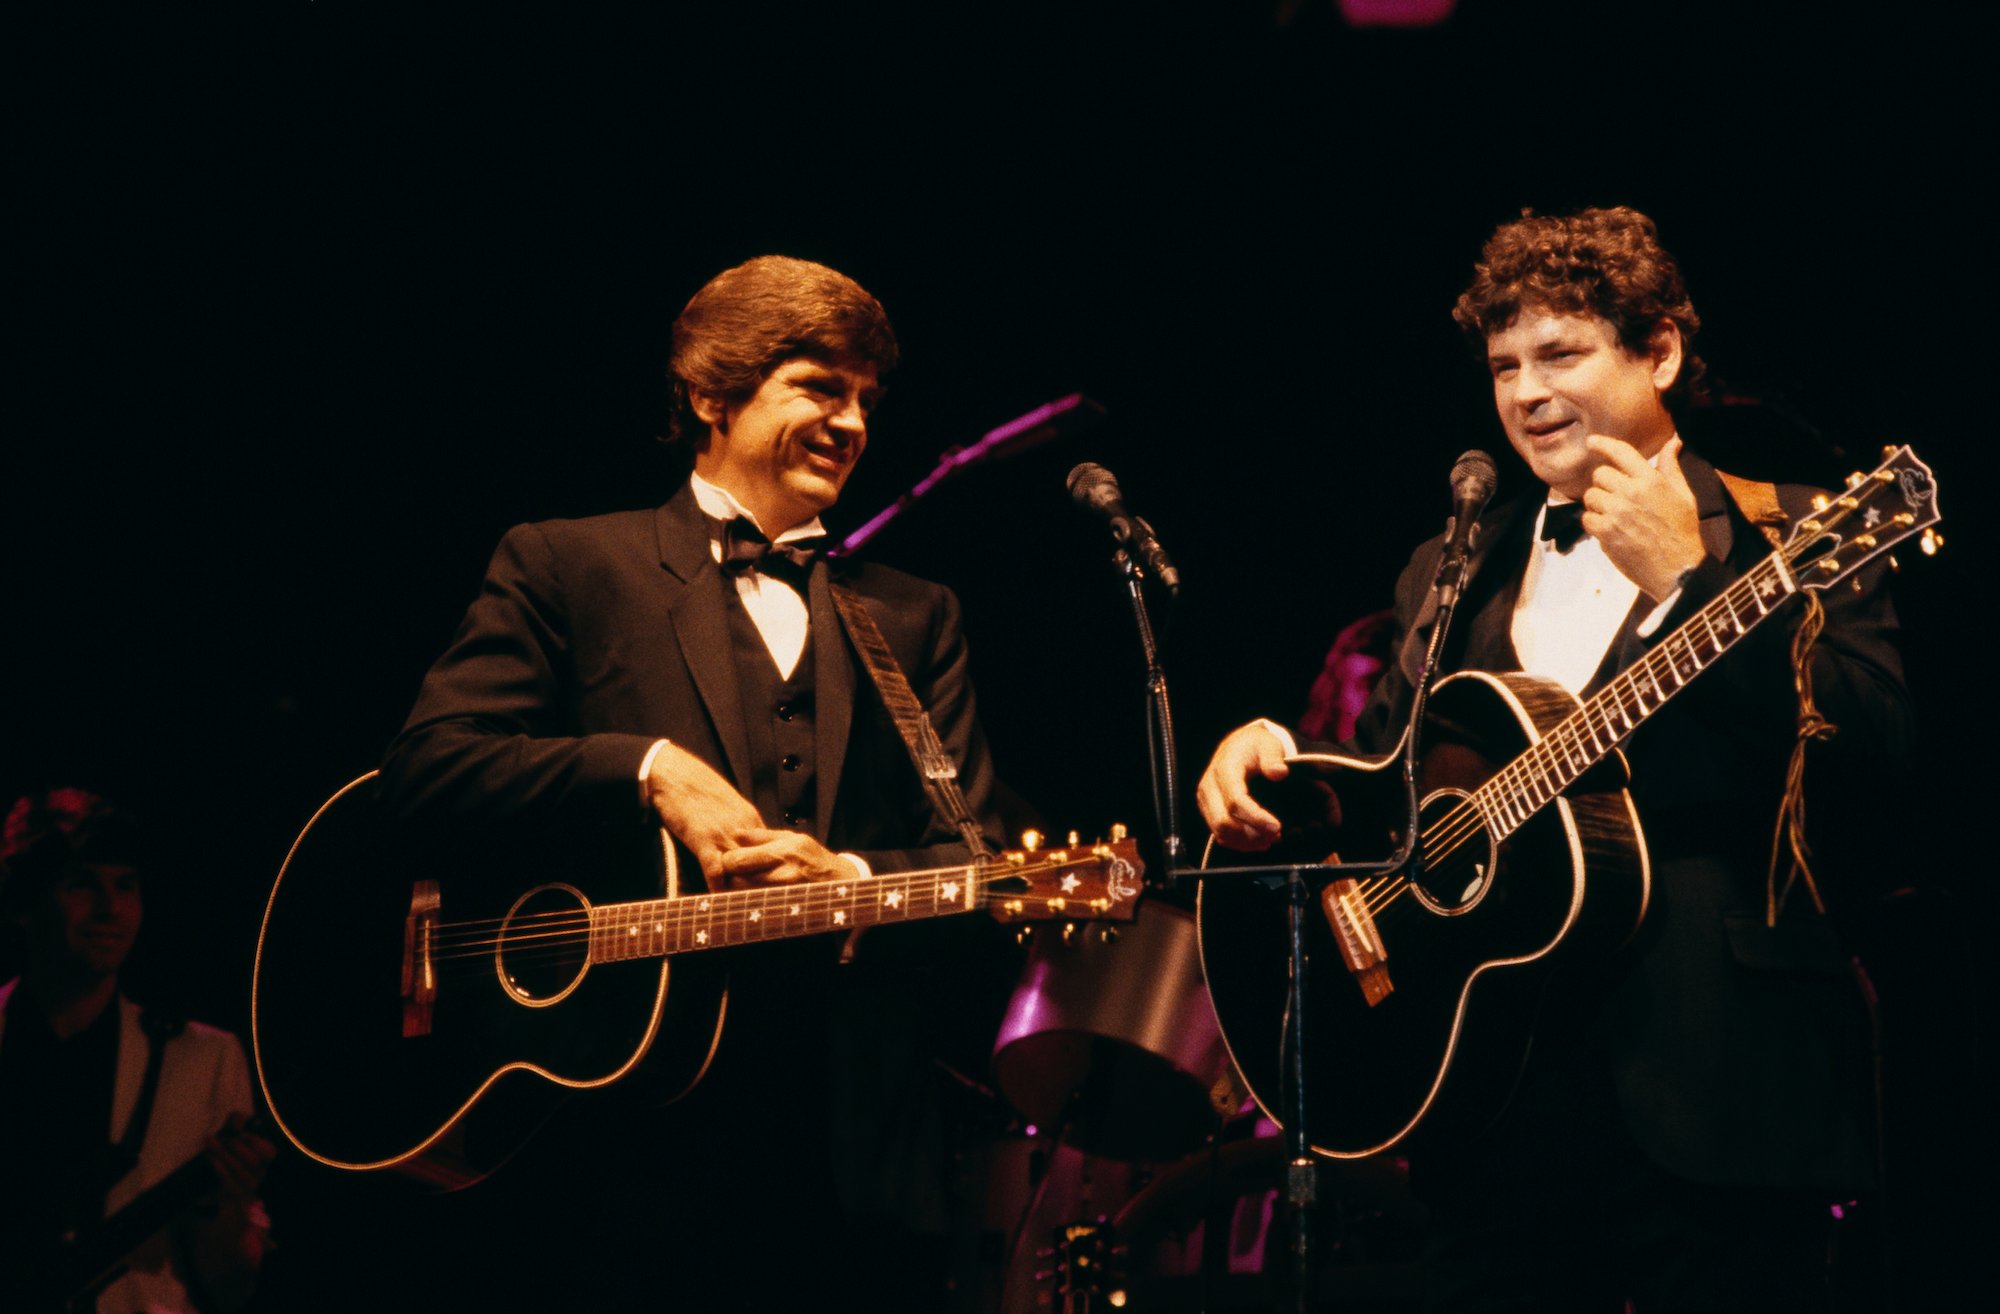 (L-R) Phil and Don Everly performing on stage